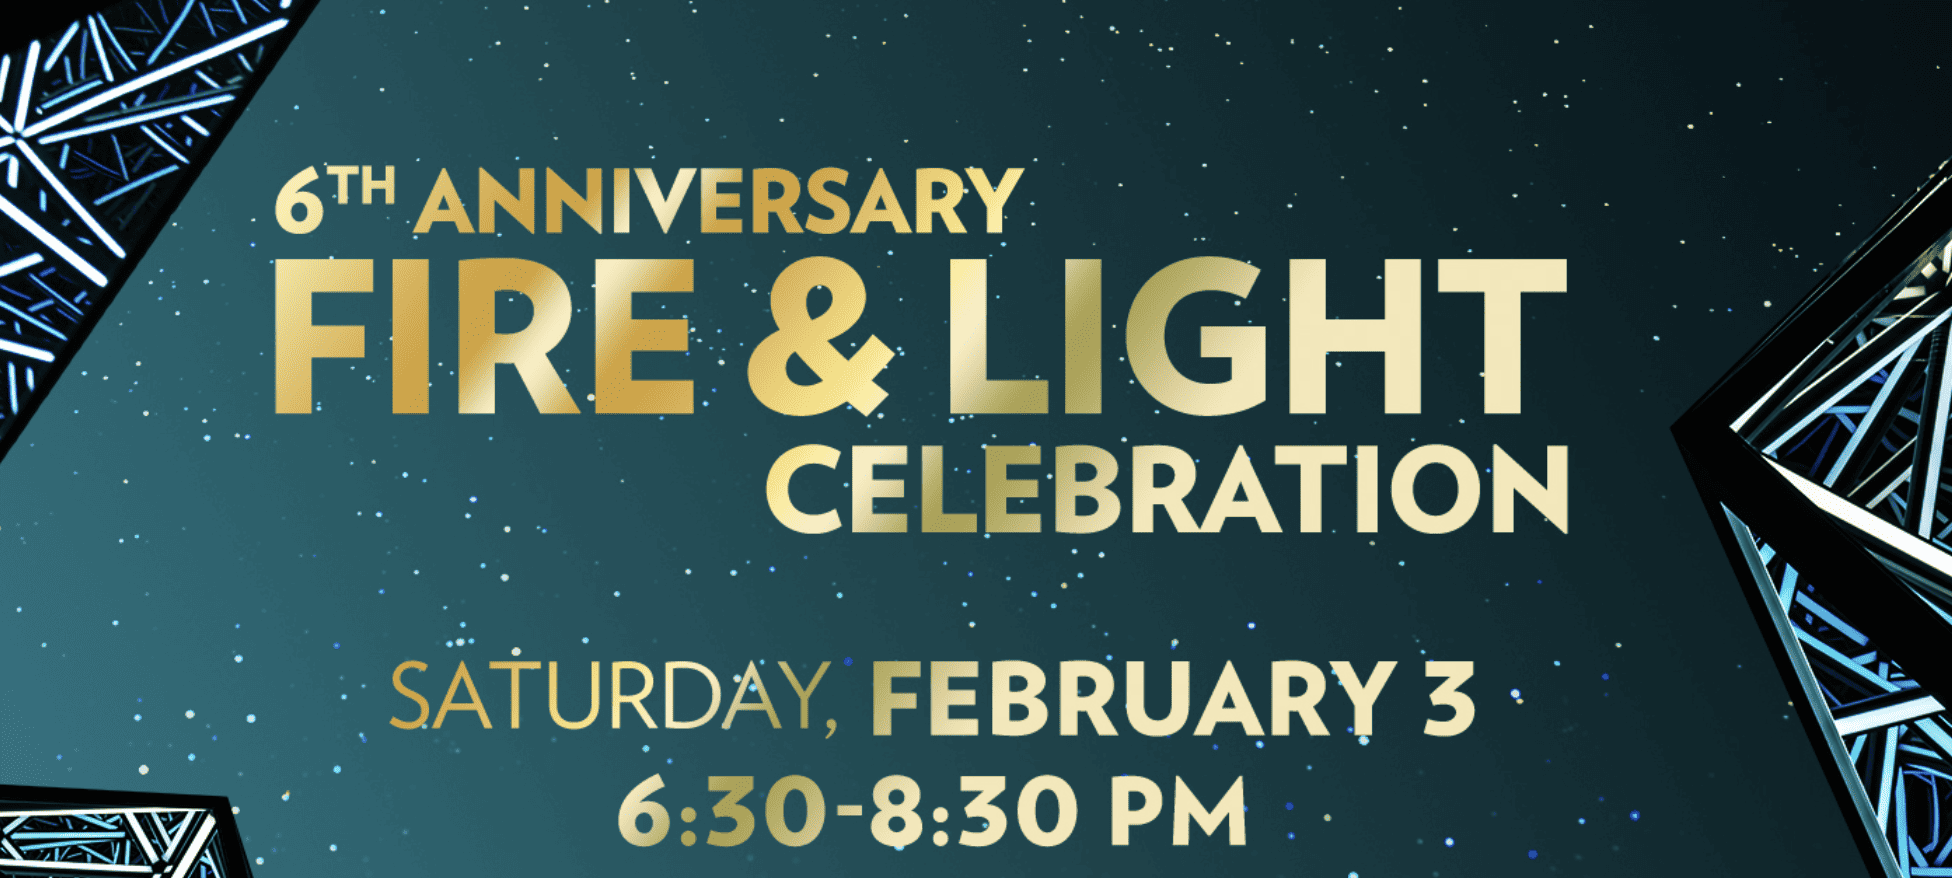 6th Anniversary Fire & Light Celebration at the Imagine Museum on Saturday, February 3 from 6:30pm-8:30pm